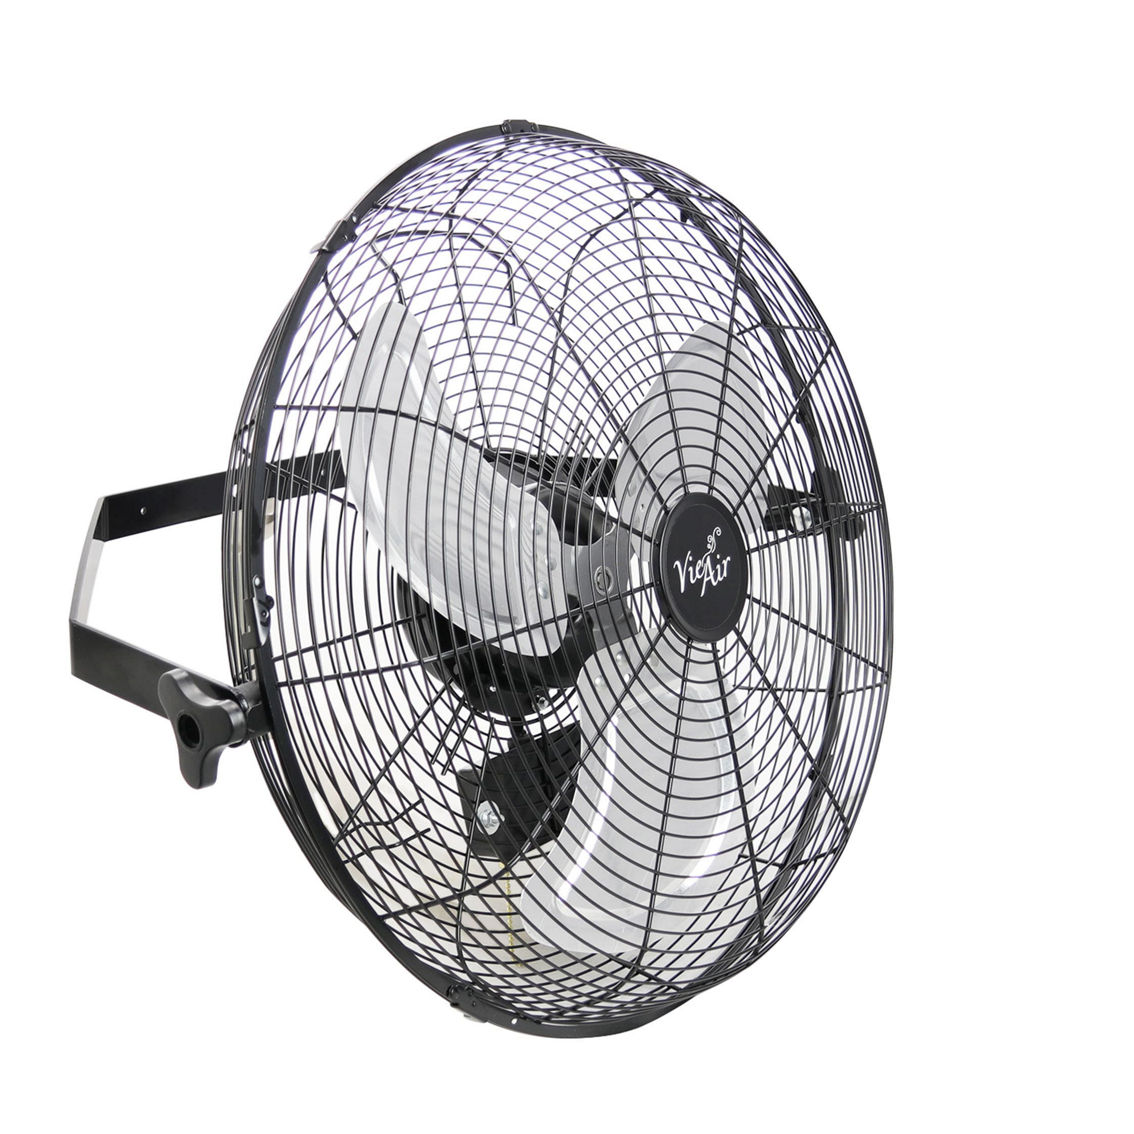 Vie Air Dual Function 18 Inch Wall Mountable Tilting Fan with 3 Speed Motor in B - Image 3 of 5